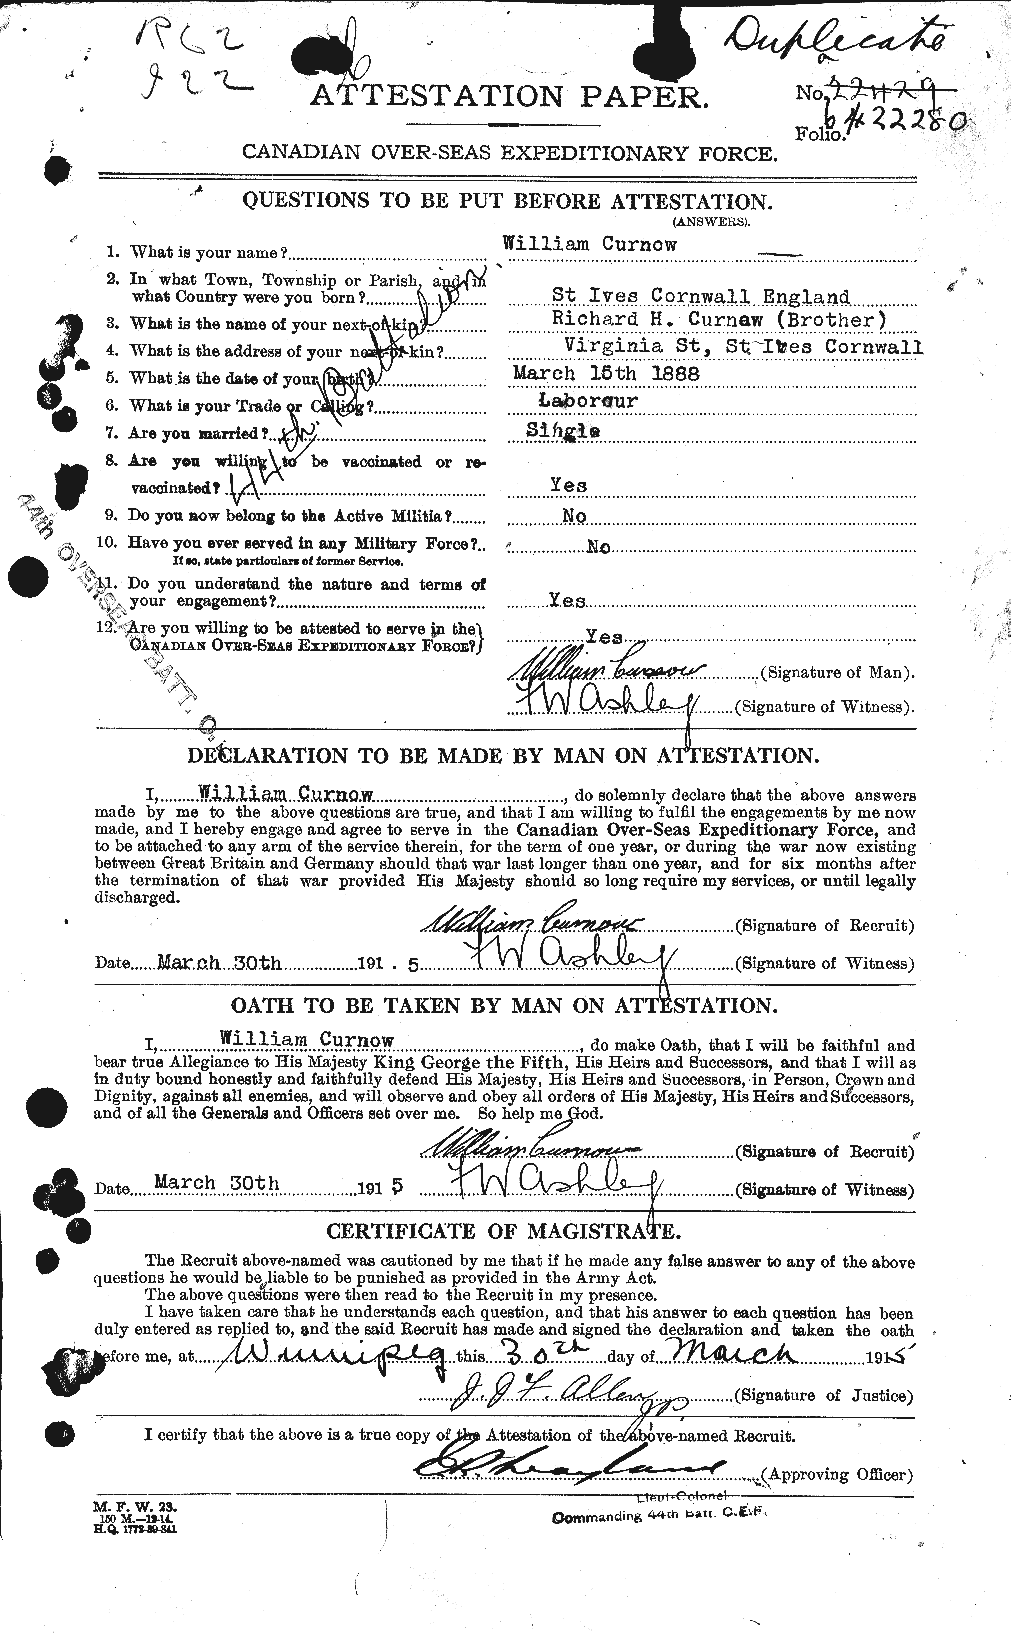 Personnel Records of the First World War - CEF 074790a